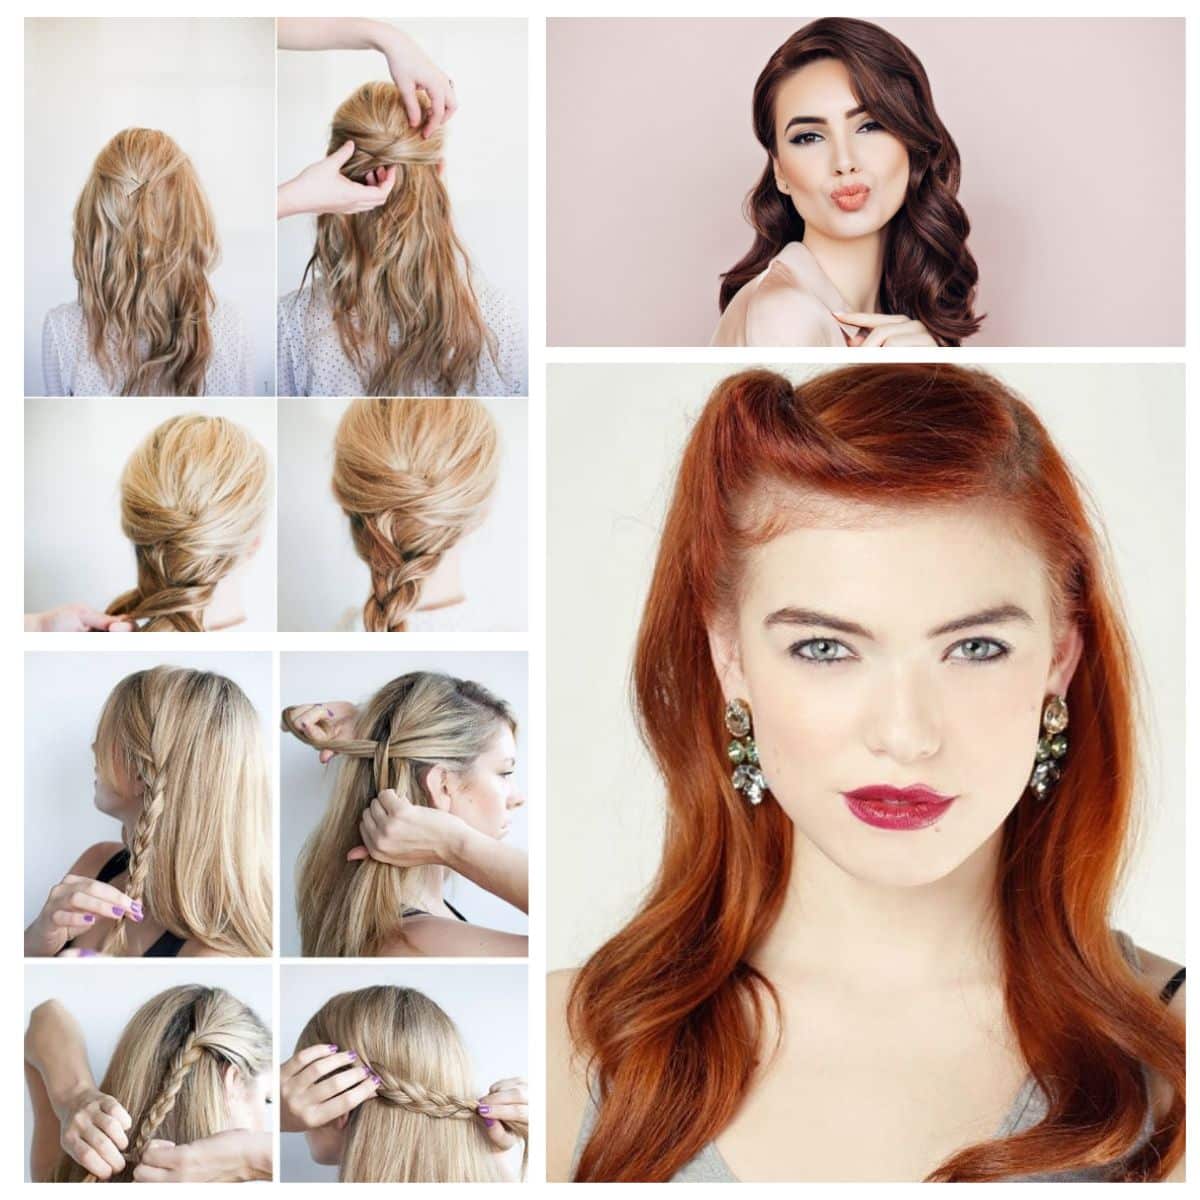 Best Hairstyles step by step for girls APK pour Android Télécharger